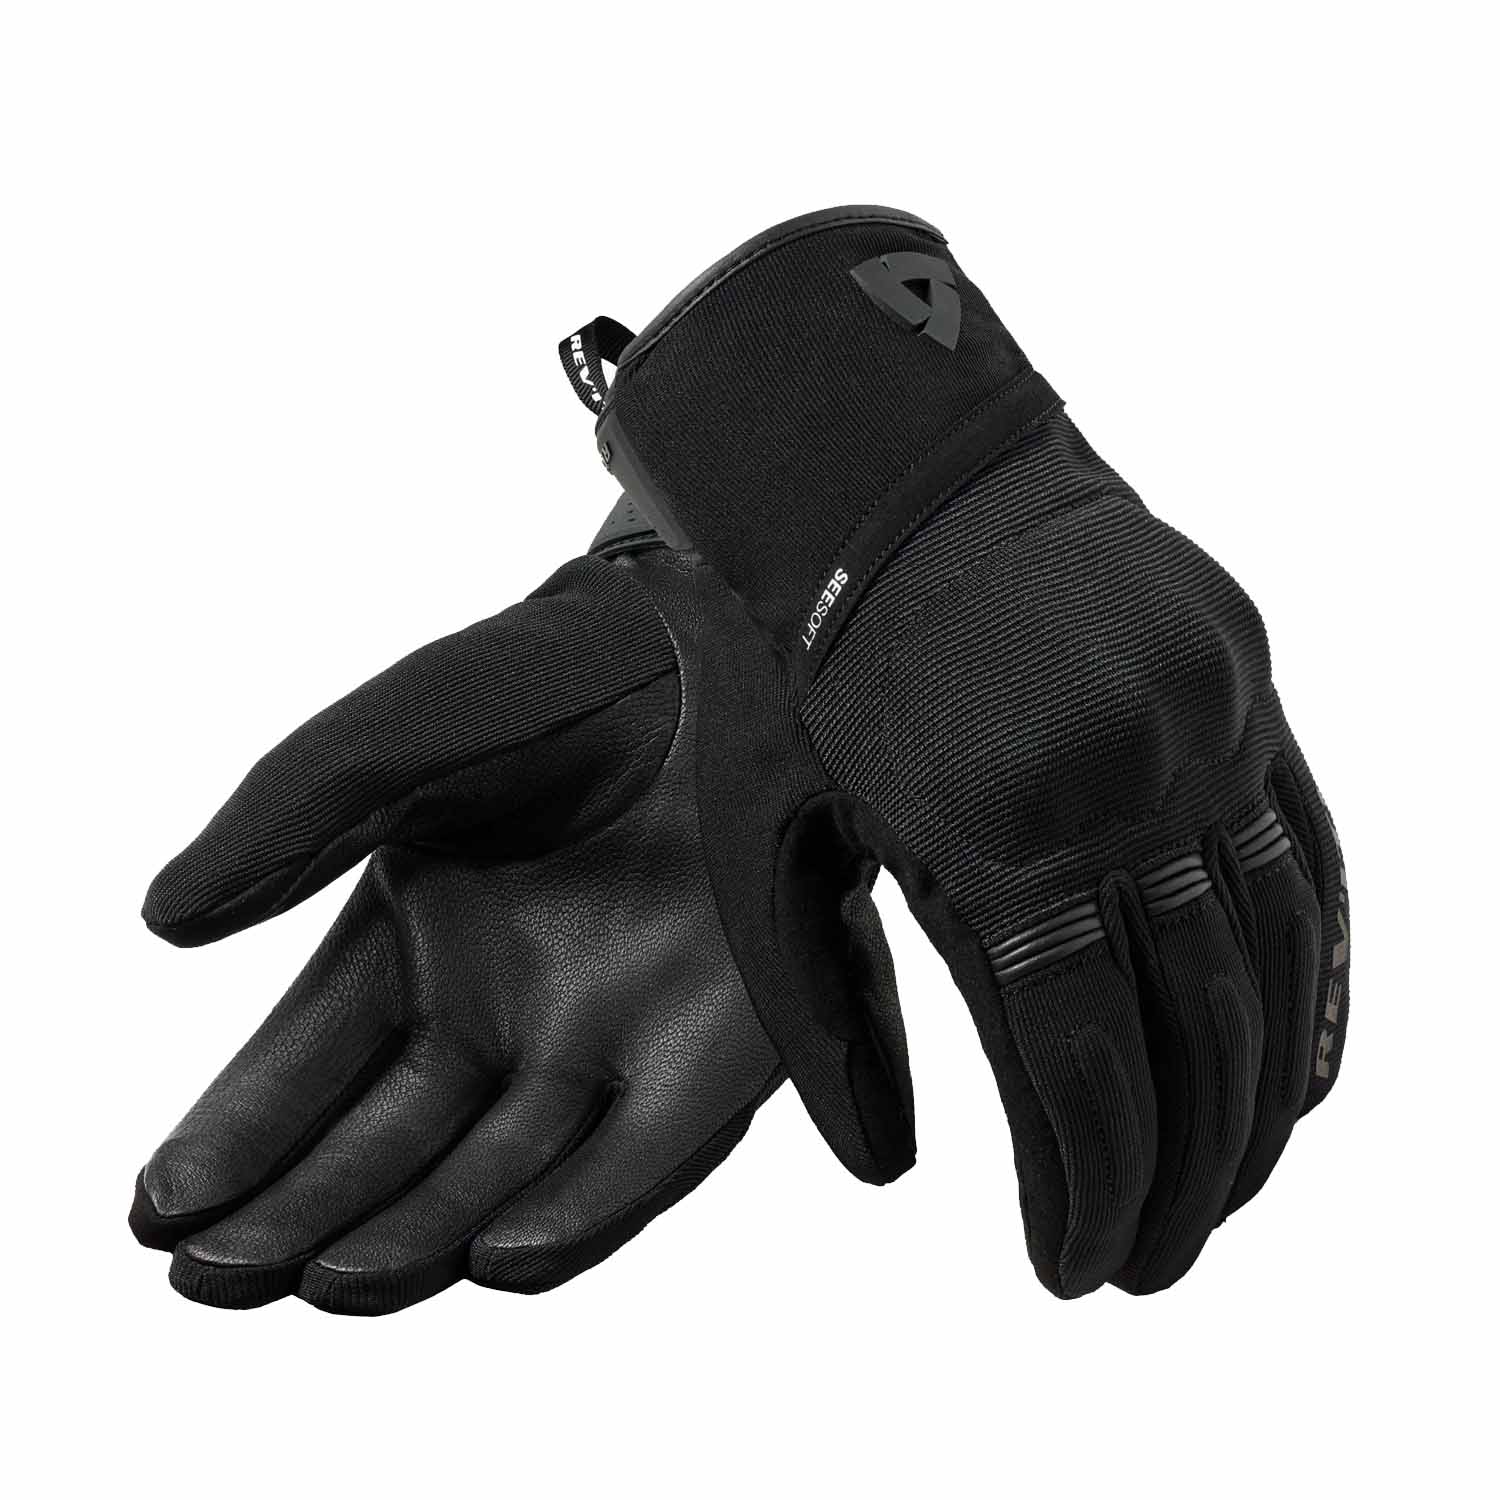 Image of REV'IT! Mosca 2 H2O Gloves Black Taille 4XL